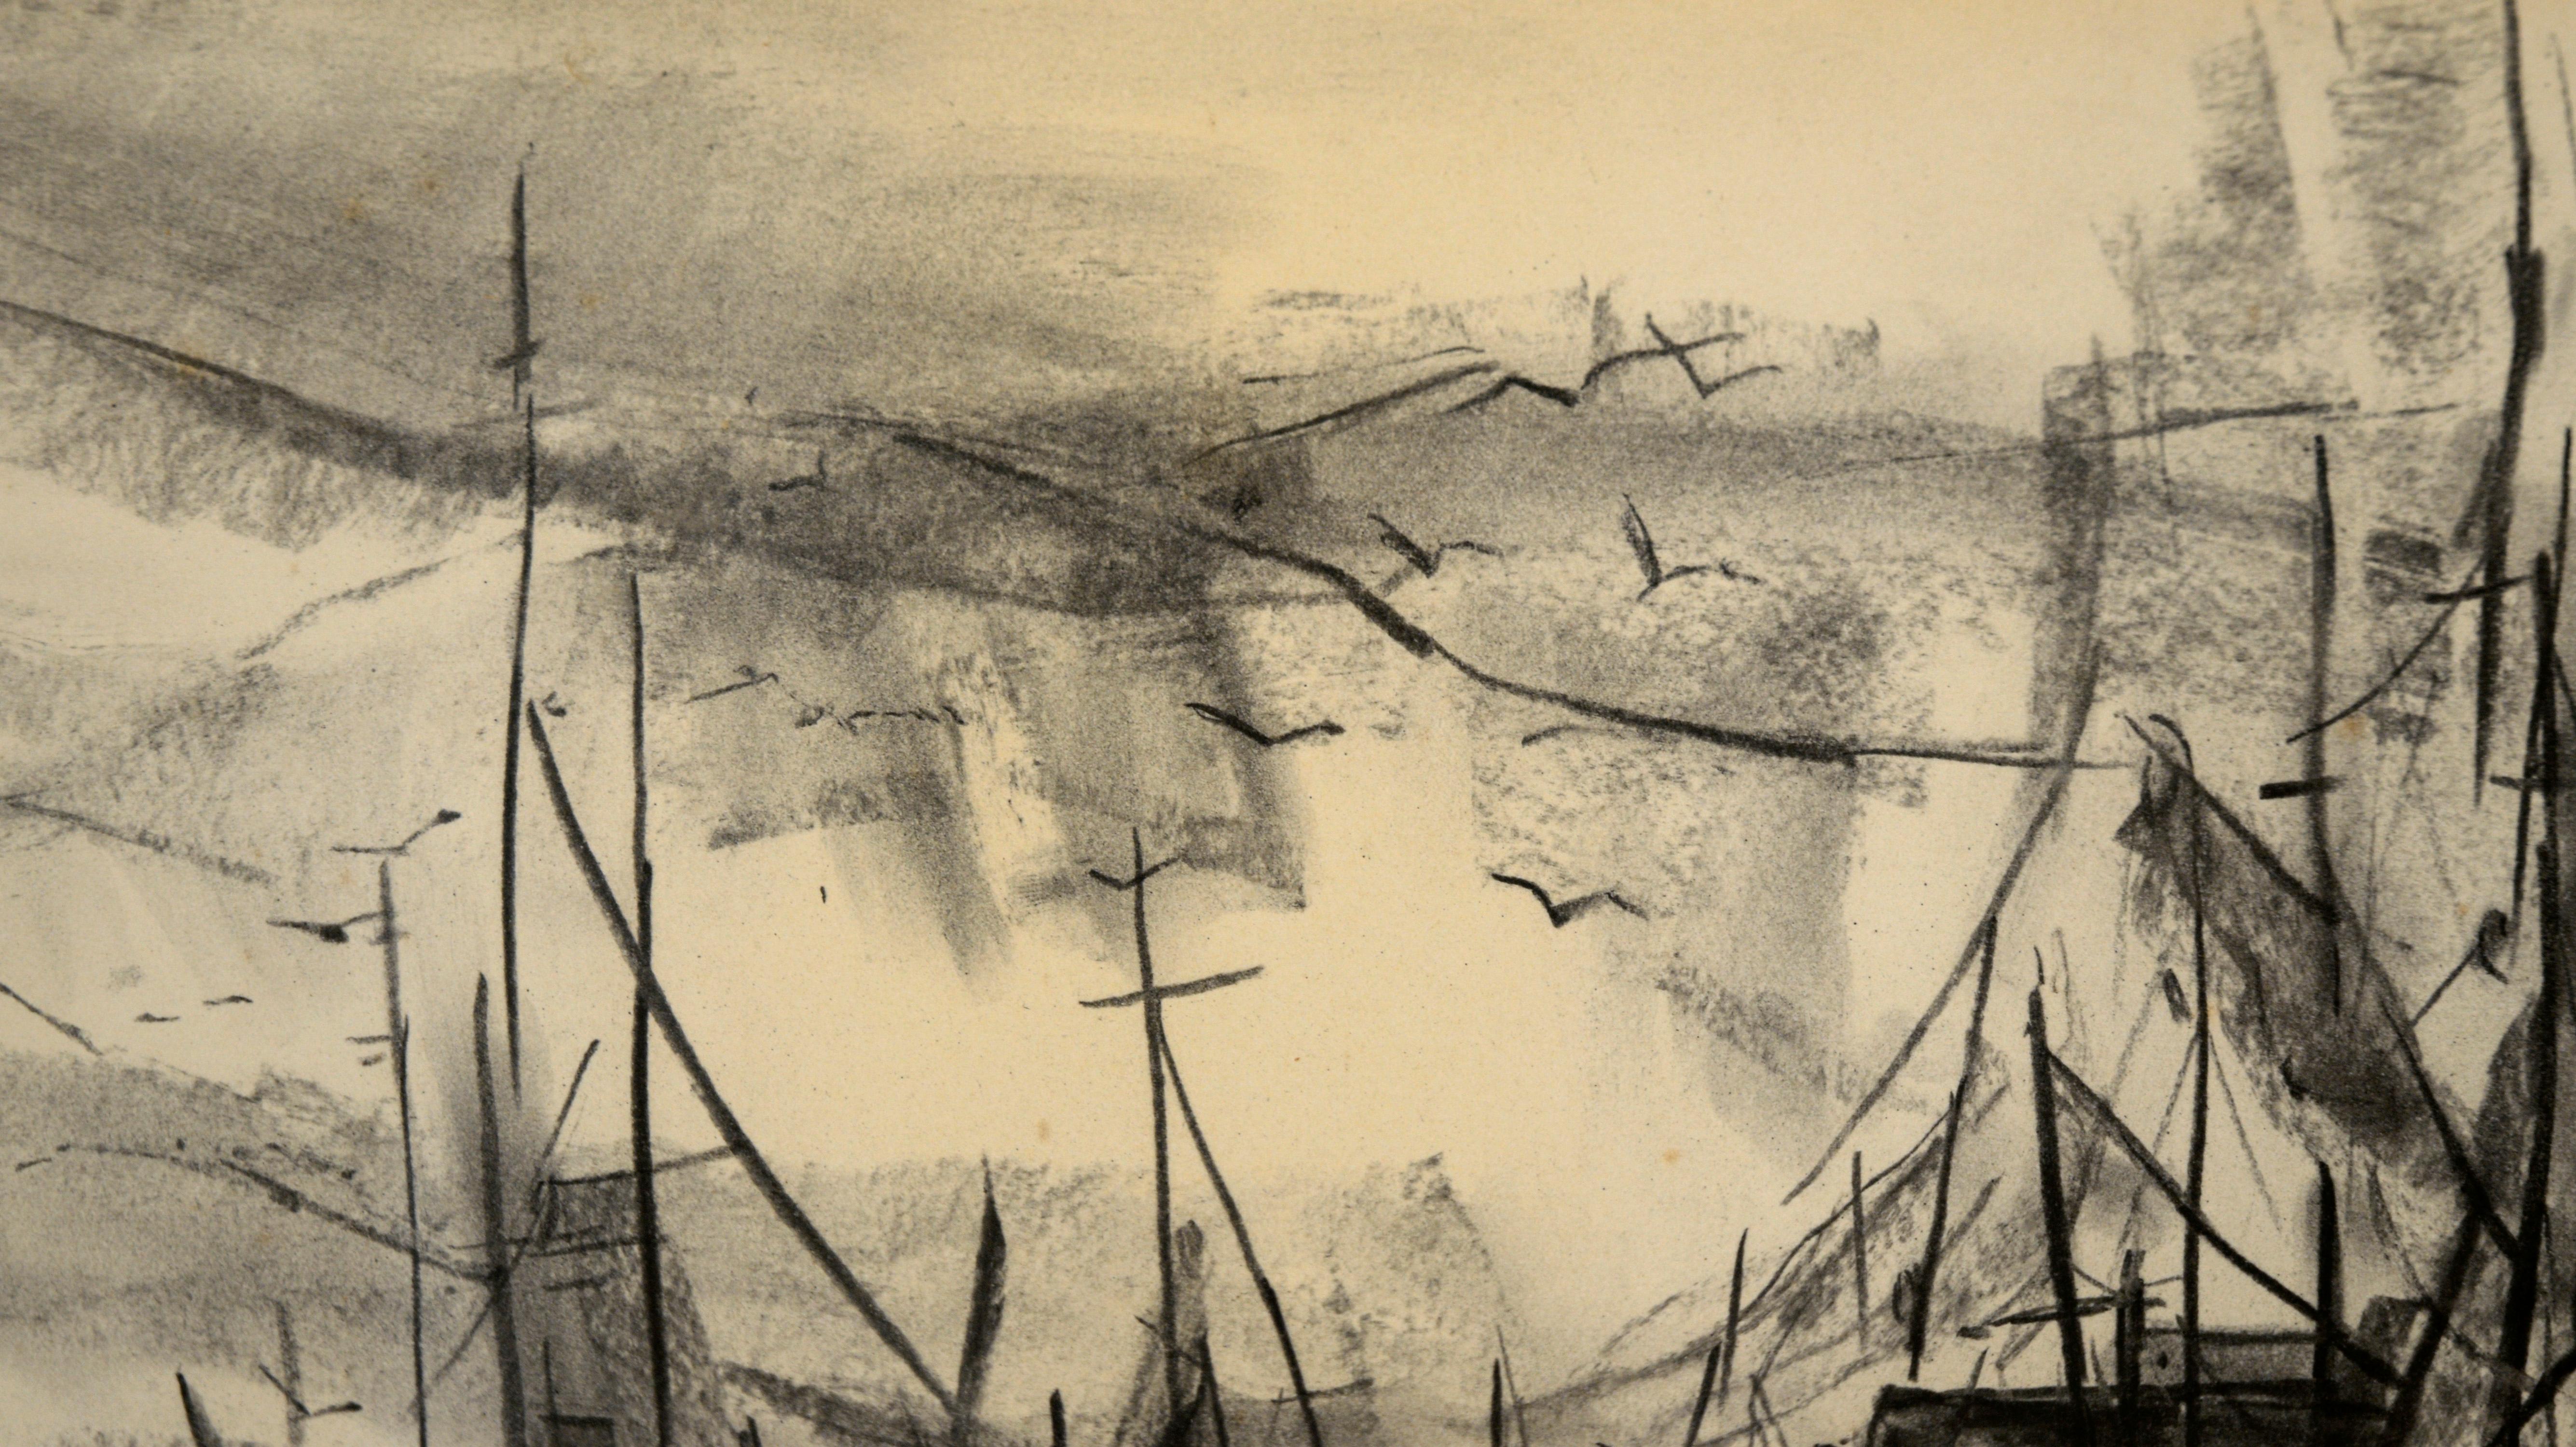 Ships at the Harbor - Nautical Seascape with Seagulls in Charcoal on Paper For Sale 1